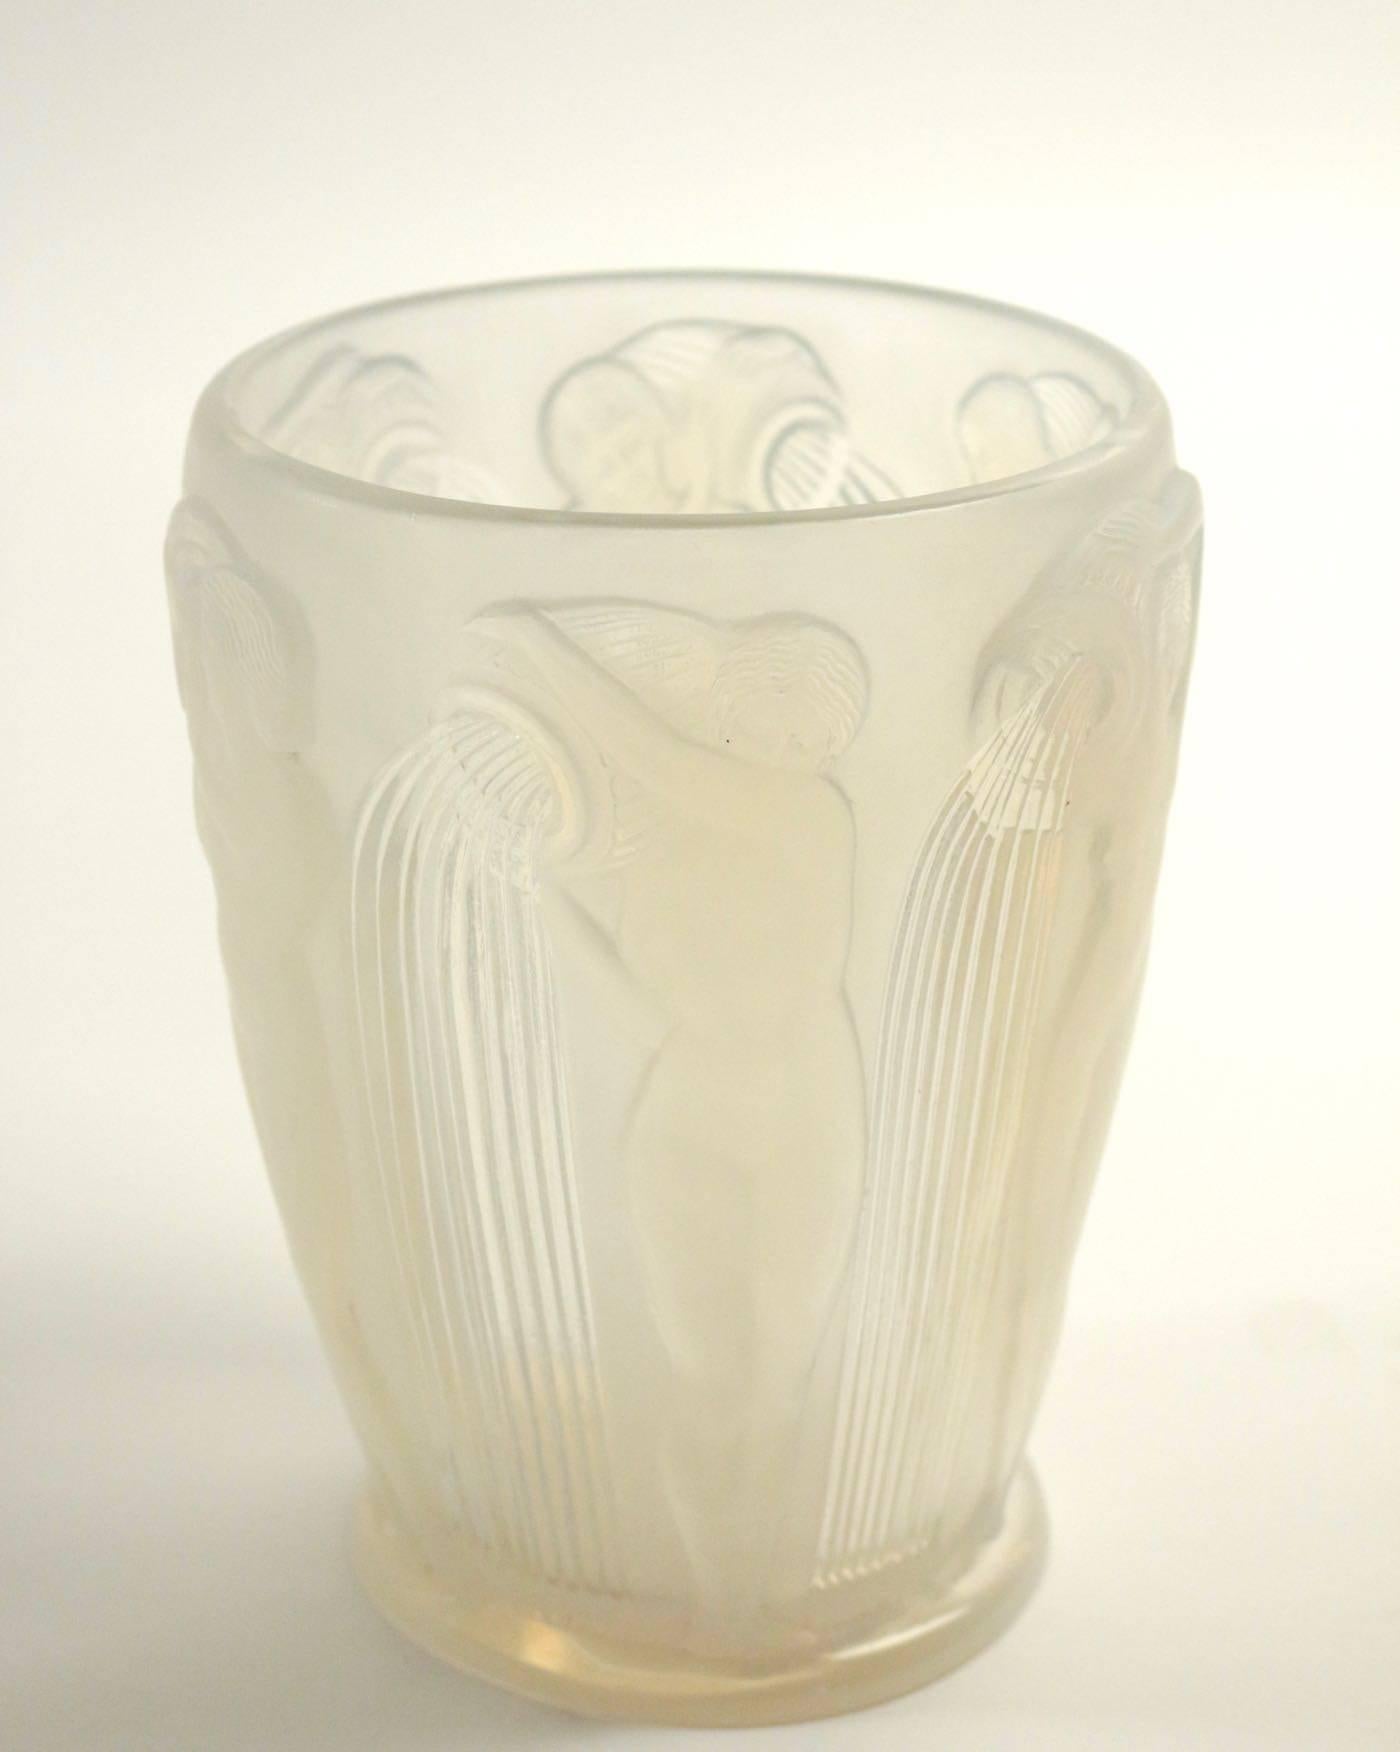 High opalescent press-molded glass with a design of nude women pouring water from large shoulder jugs.
'Danaides' a vase, design 1926
opalescent glass, frosted and polished.
Measure: 18.5cm high, engraved 'R. Lalique France'
Marcilhac no. model: